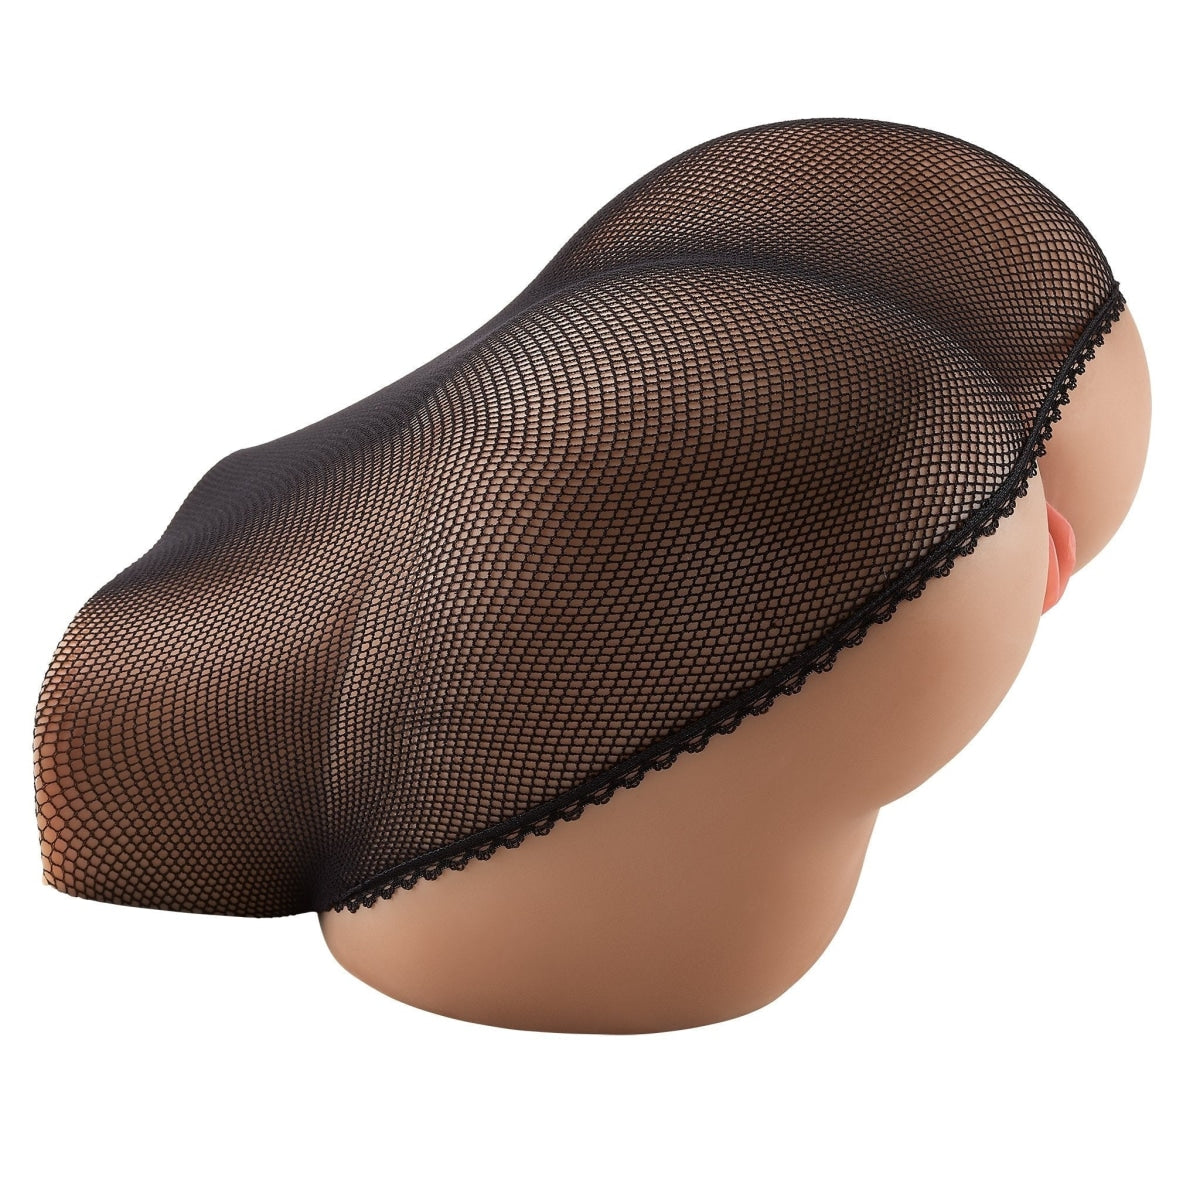 Cloud 9 Pleasure Pussy & Ass Lifesize Body Mold - Brown Intimates Adult Boutique